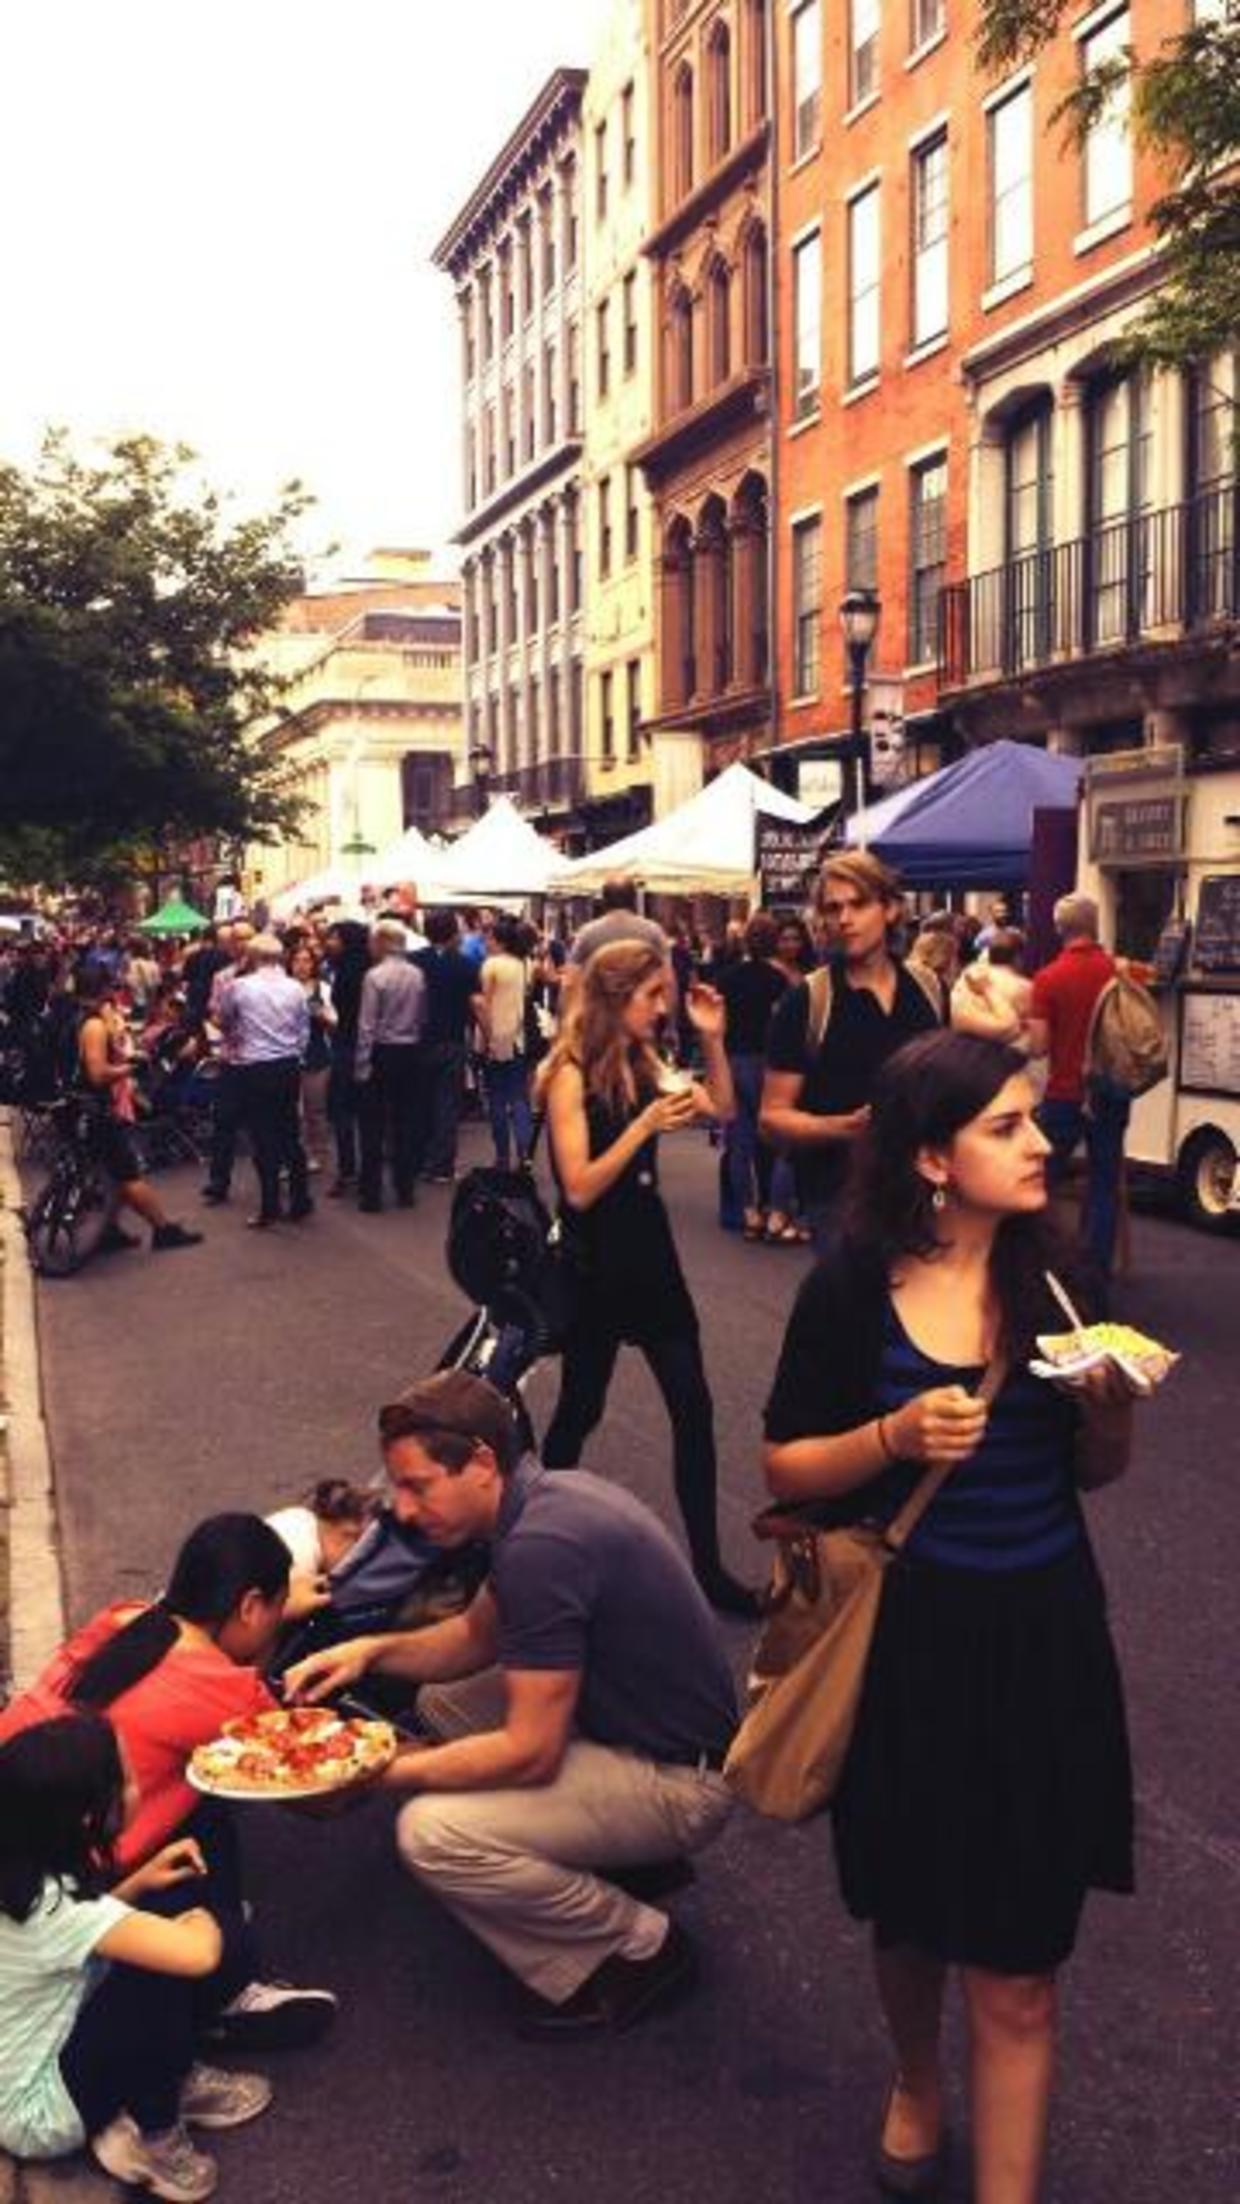 Night Market Street Food Festival Attracts Thousands To Old City CBS